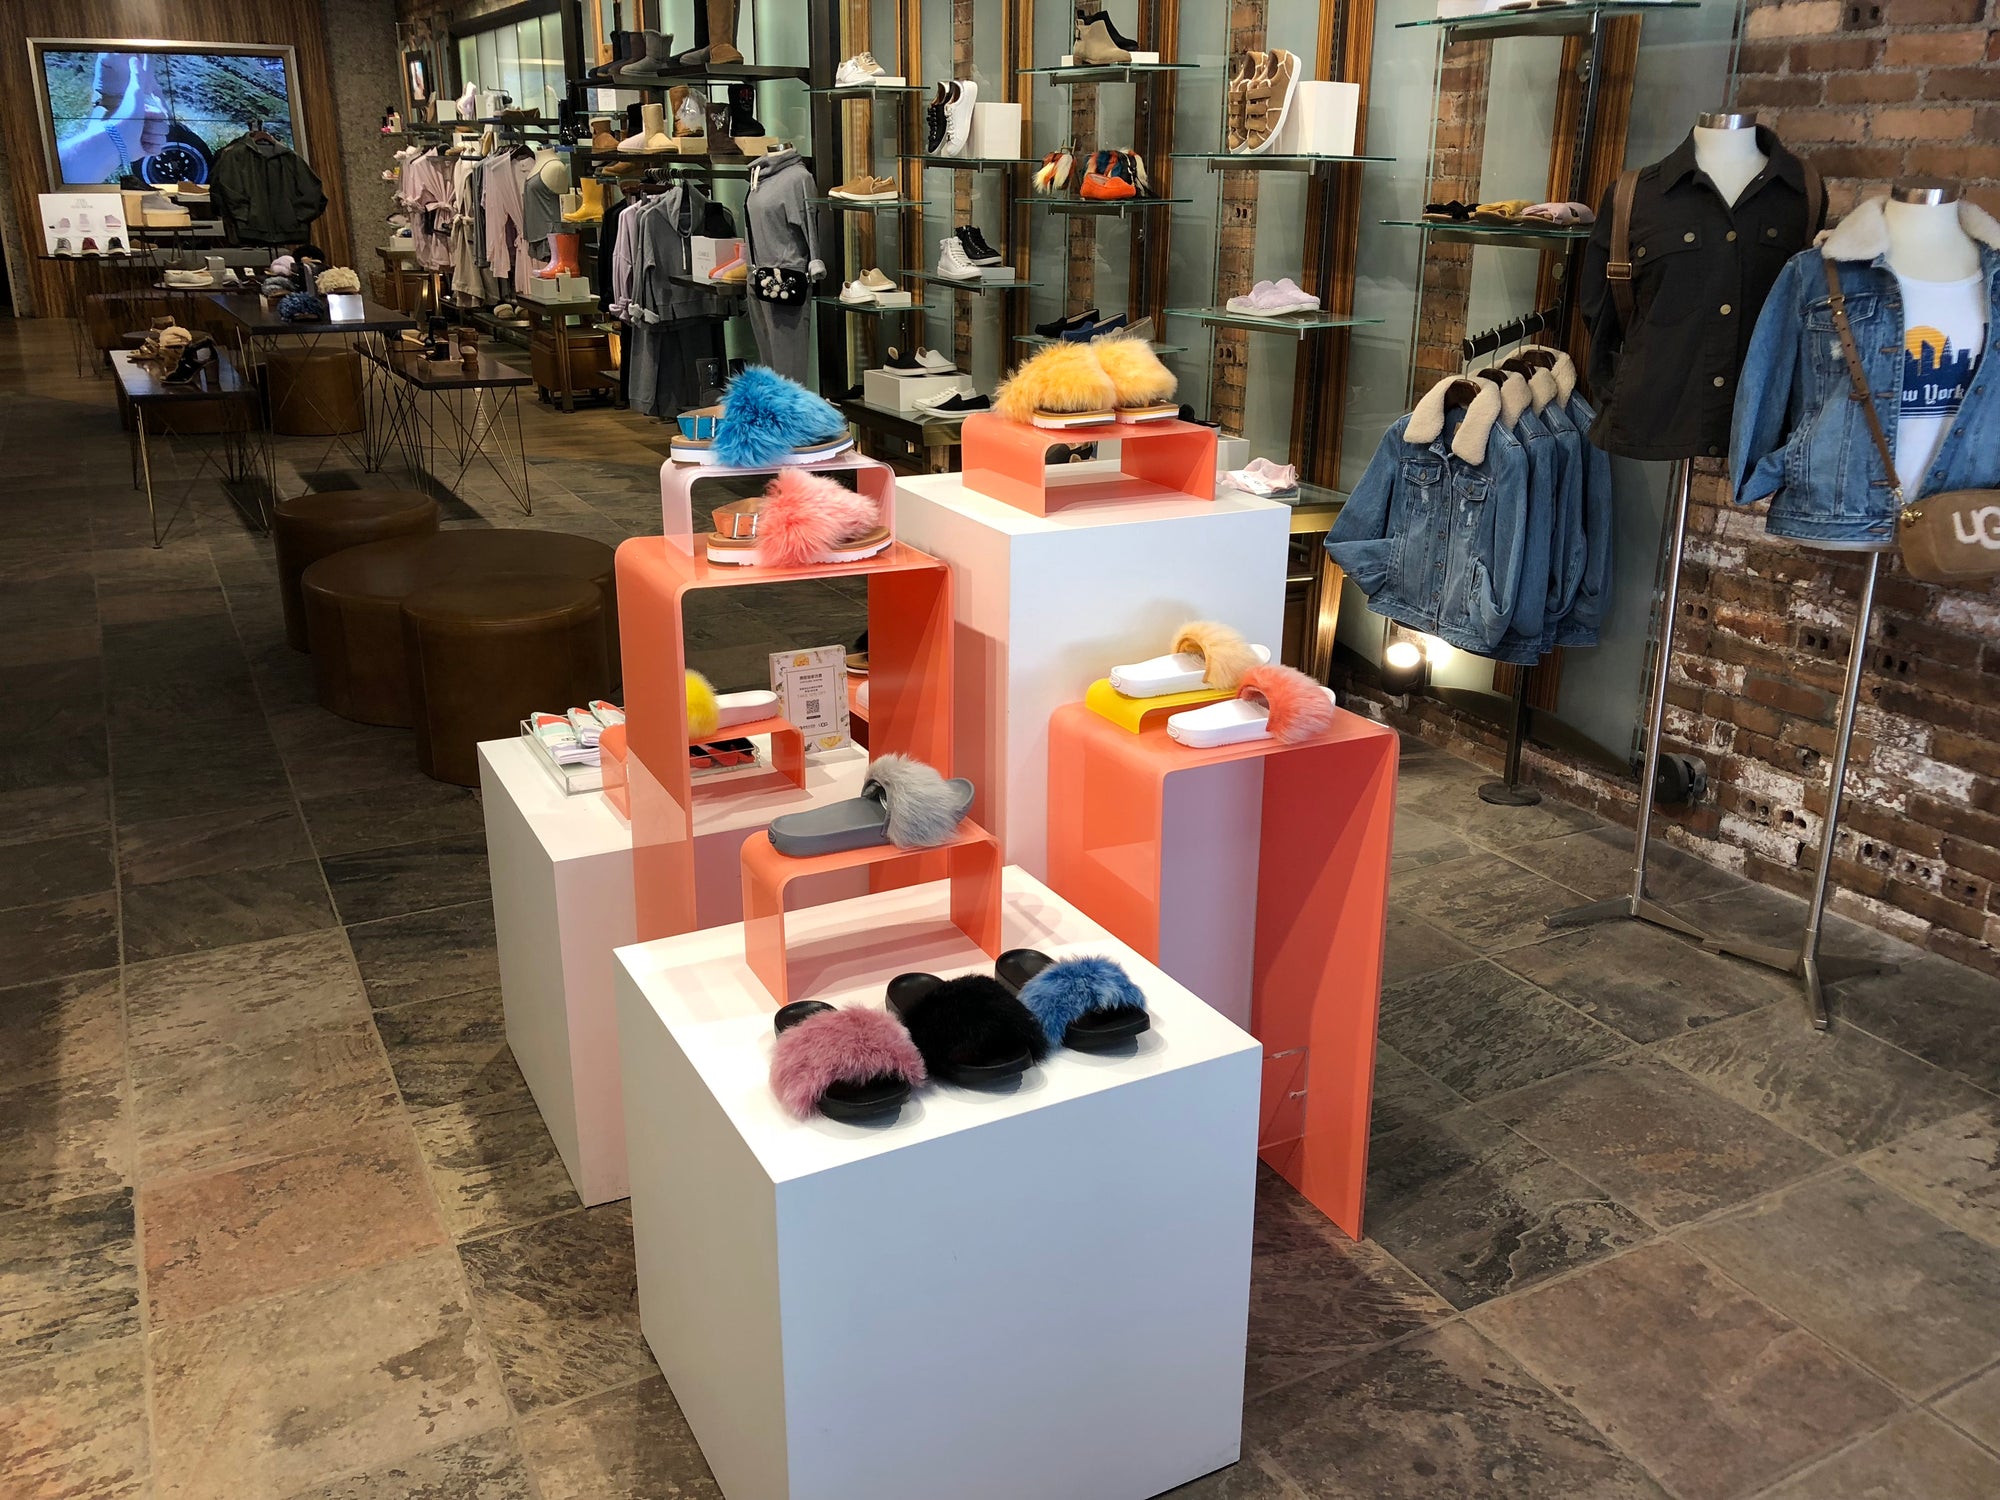  Photo is set in retail space/ clothing store. The focus is on the pedestal display. there are two white cube pedestal and one taller rectangular pedestal. There two tall waterfall pedestals that are a pink coral color. There are two smaller versions of the coral pedestals on top of the tall rectangle pedestal and the white cube in the front. There are fuzzy slippers on the displays.   